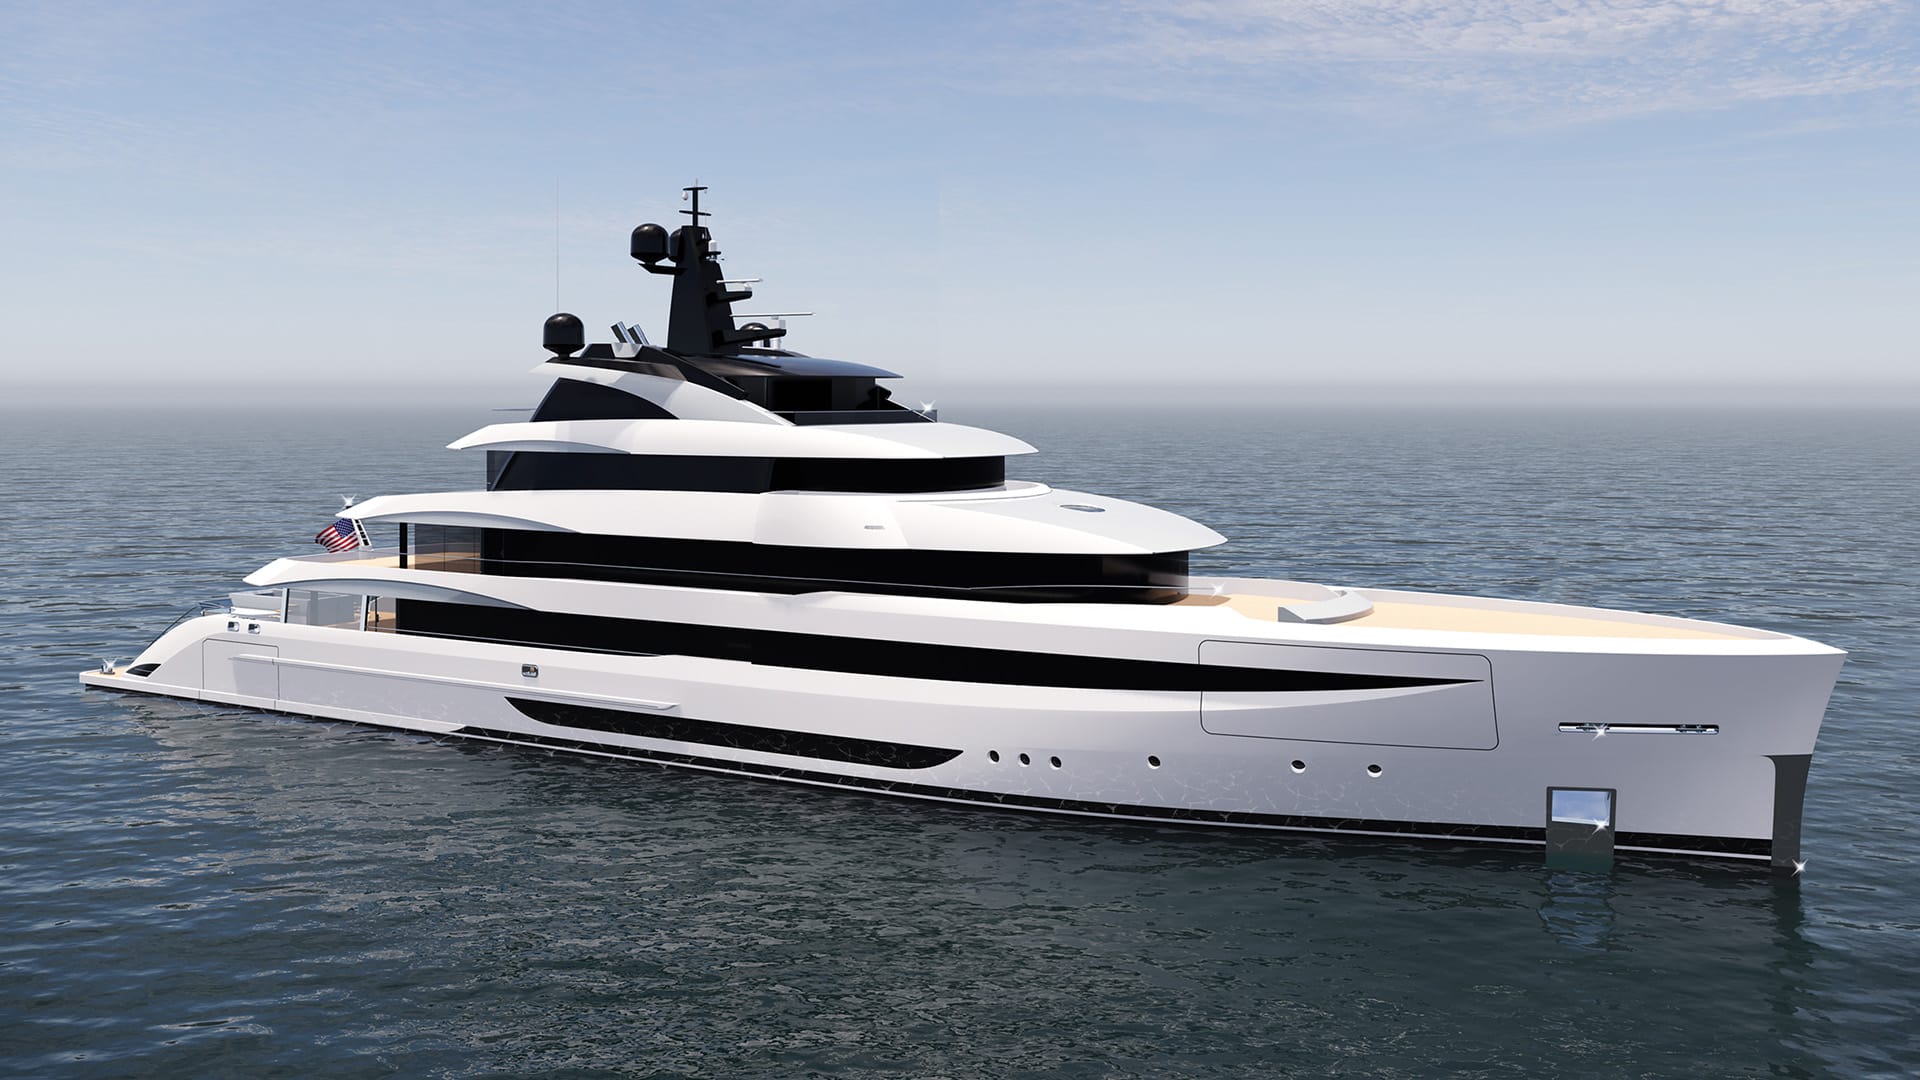 CRN SIGNS A NEW CONTRACT FOR A FULLY BESPOKE 67-METRE YACHT: CRN M/Y PROJECT 146